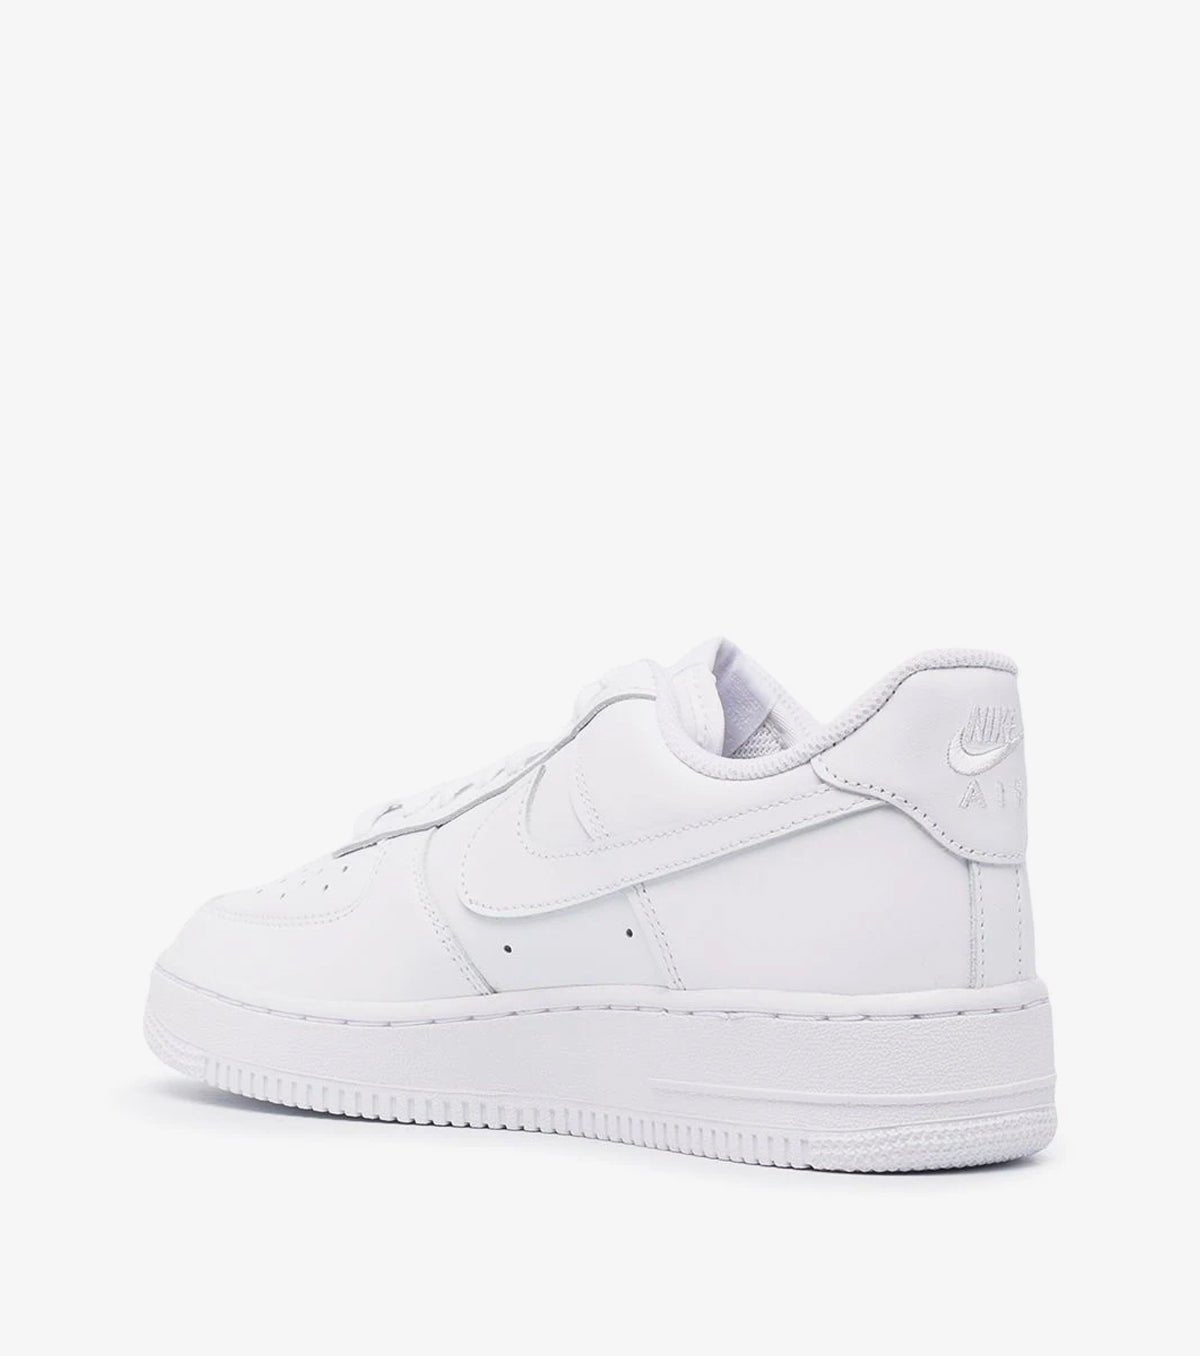 Air Force 1 '07 low-top - SNKRBASE